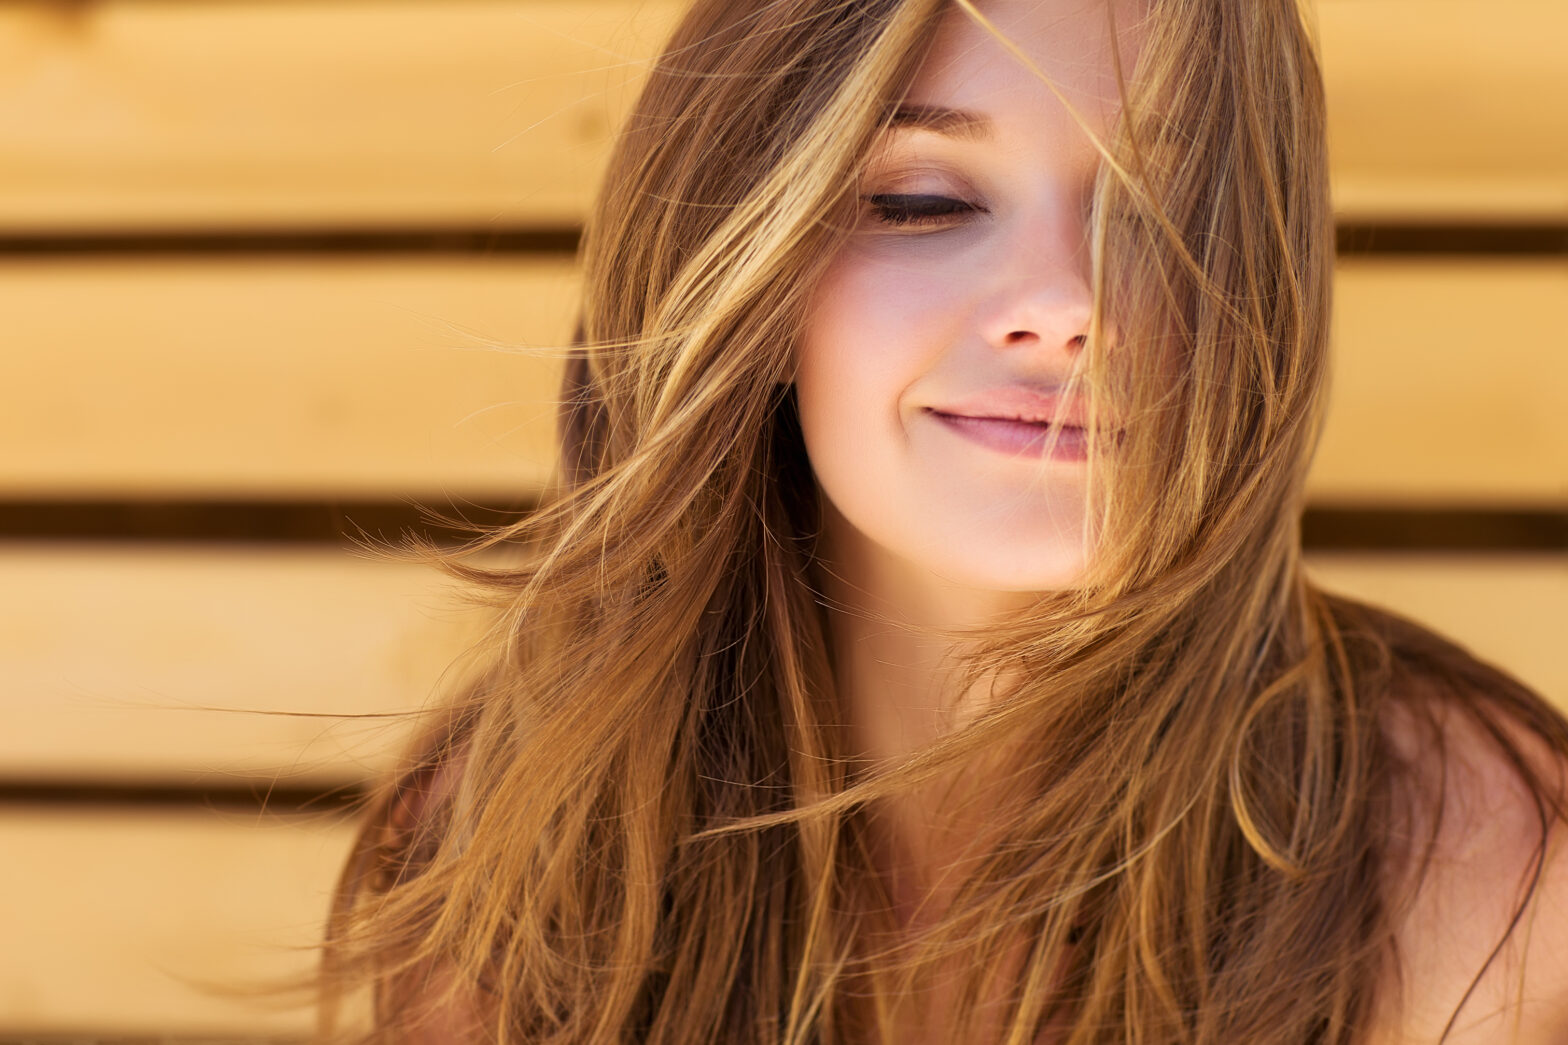 Smiling young woman with freshly restored hair and skin.